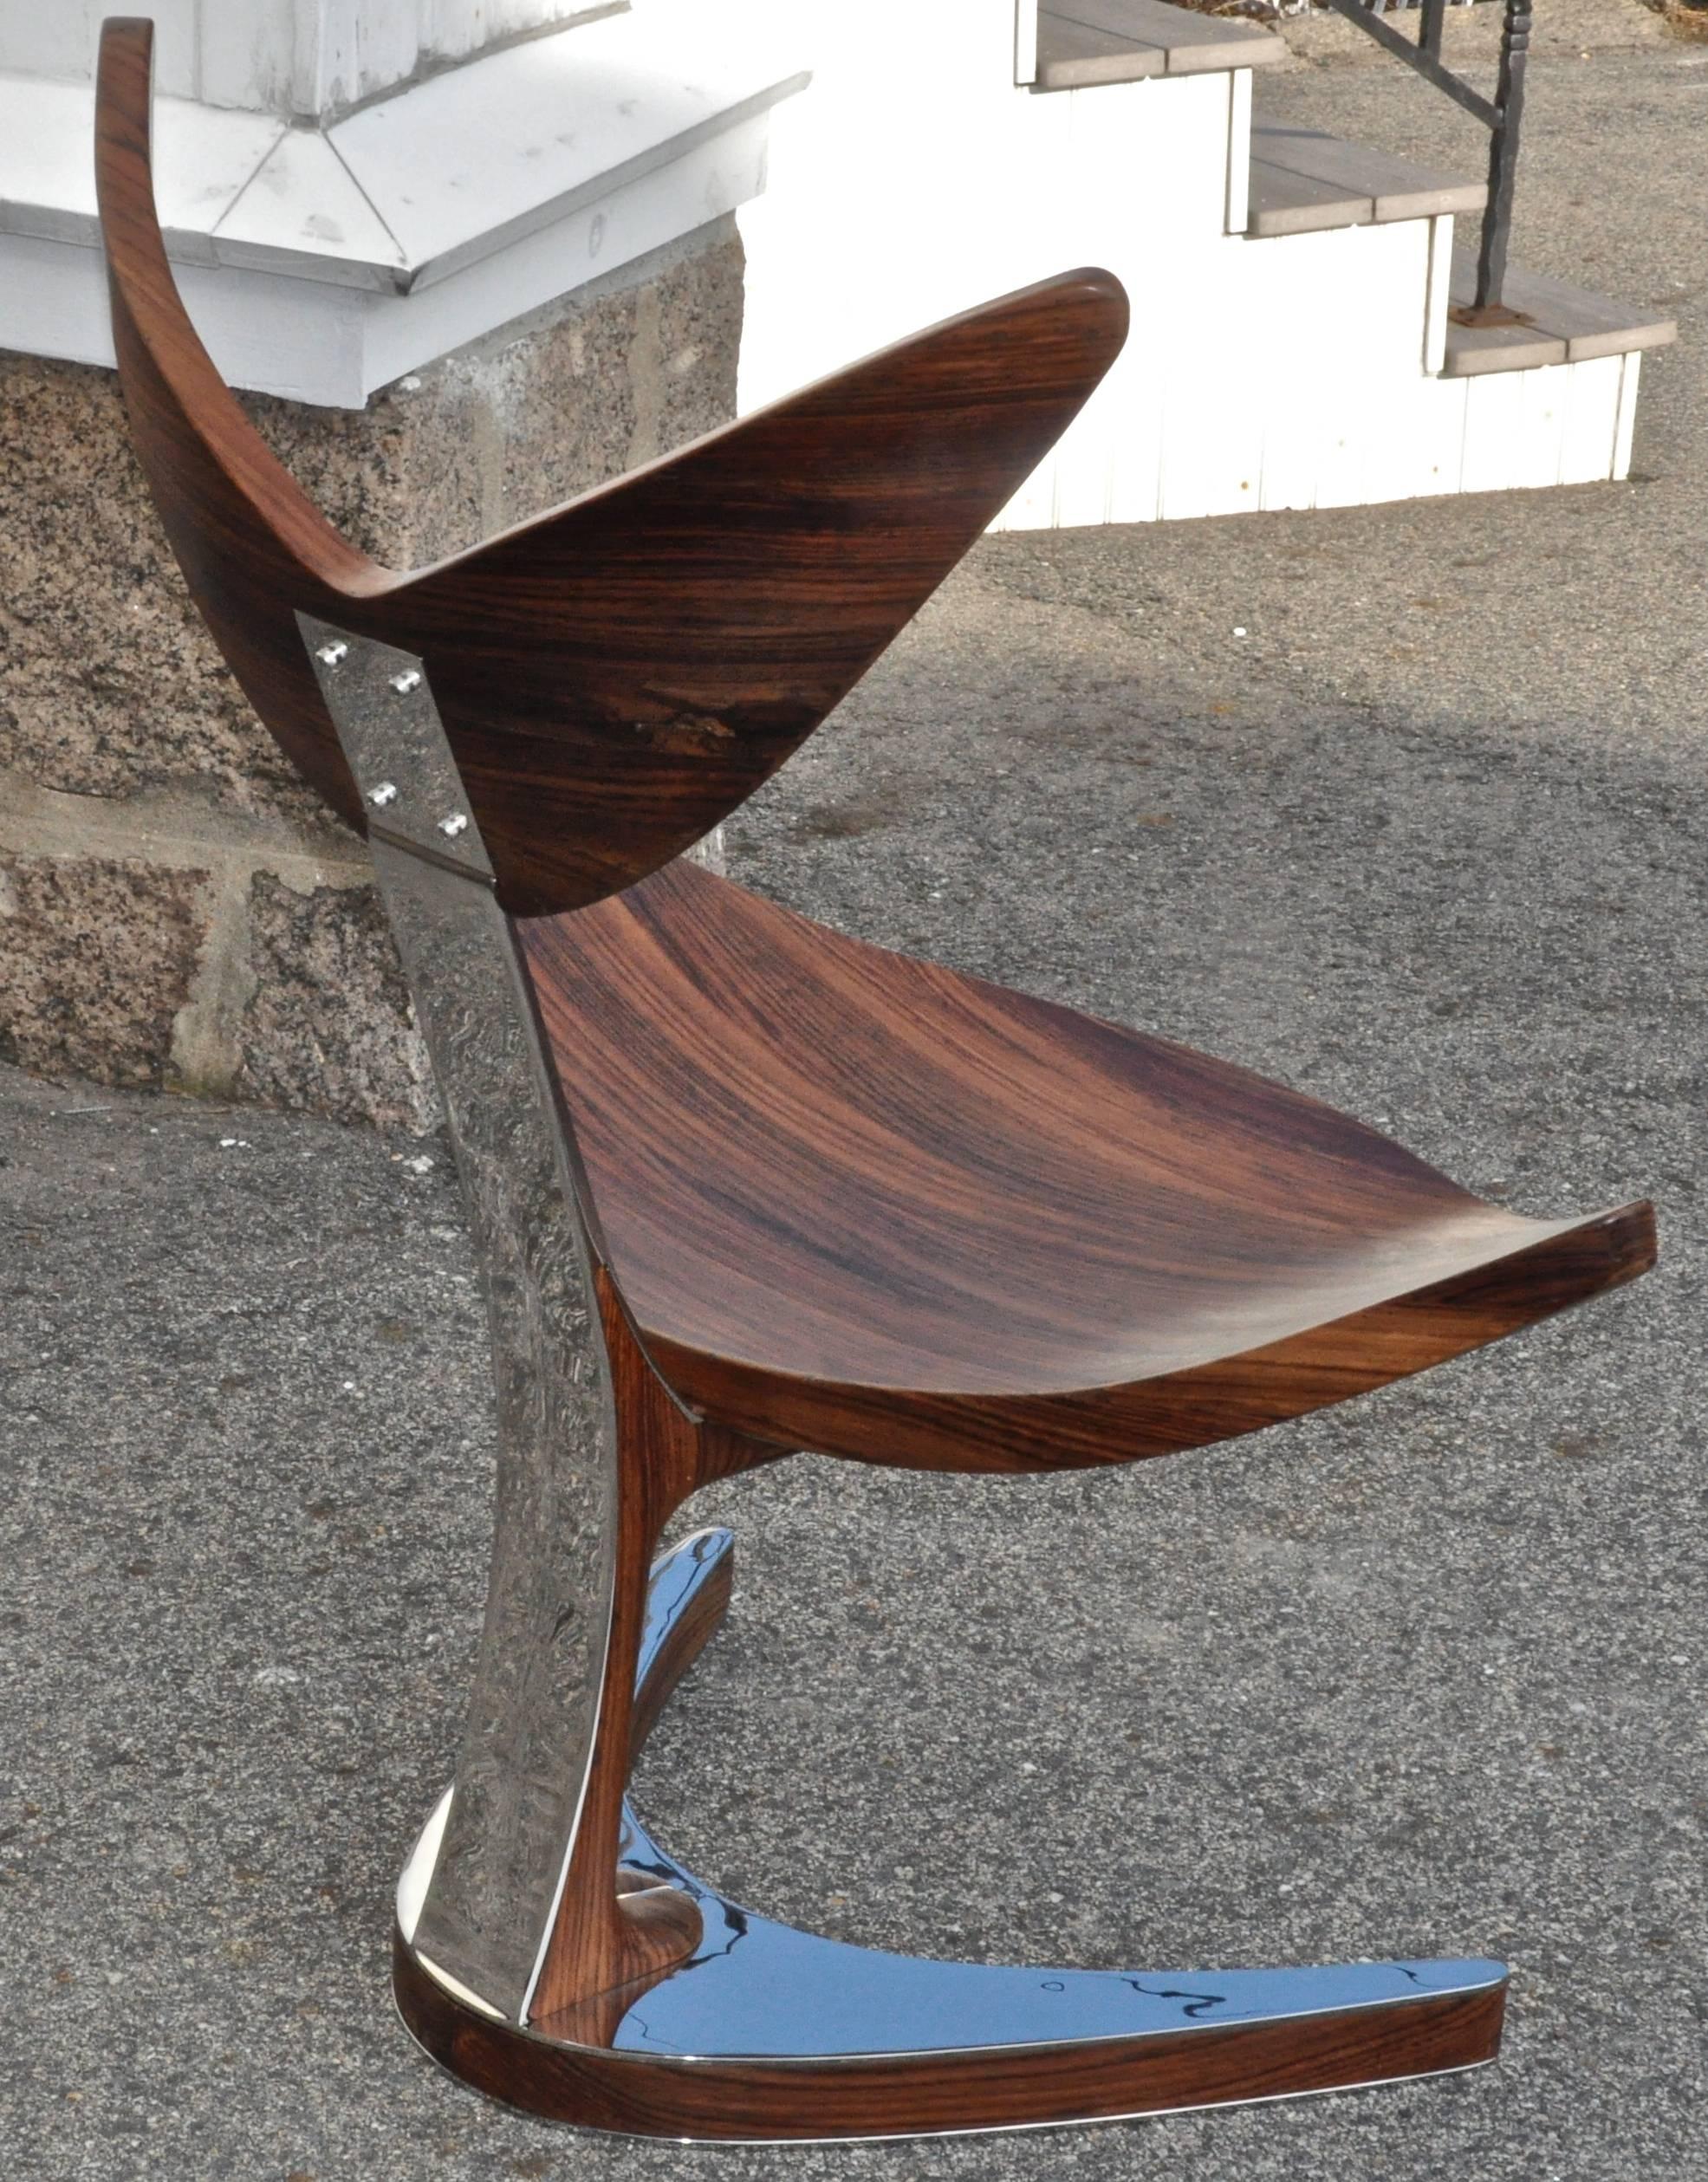 Modern Rosewood and Polished Stainless Steel Chair By Bruno Helgen